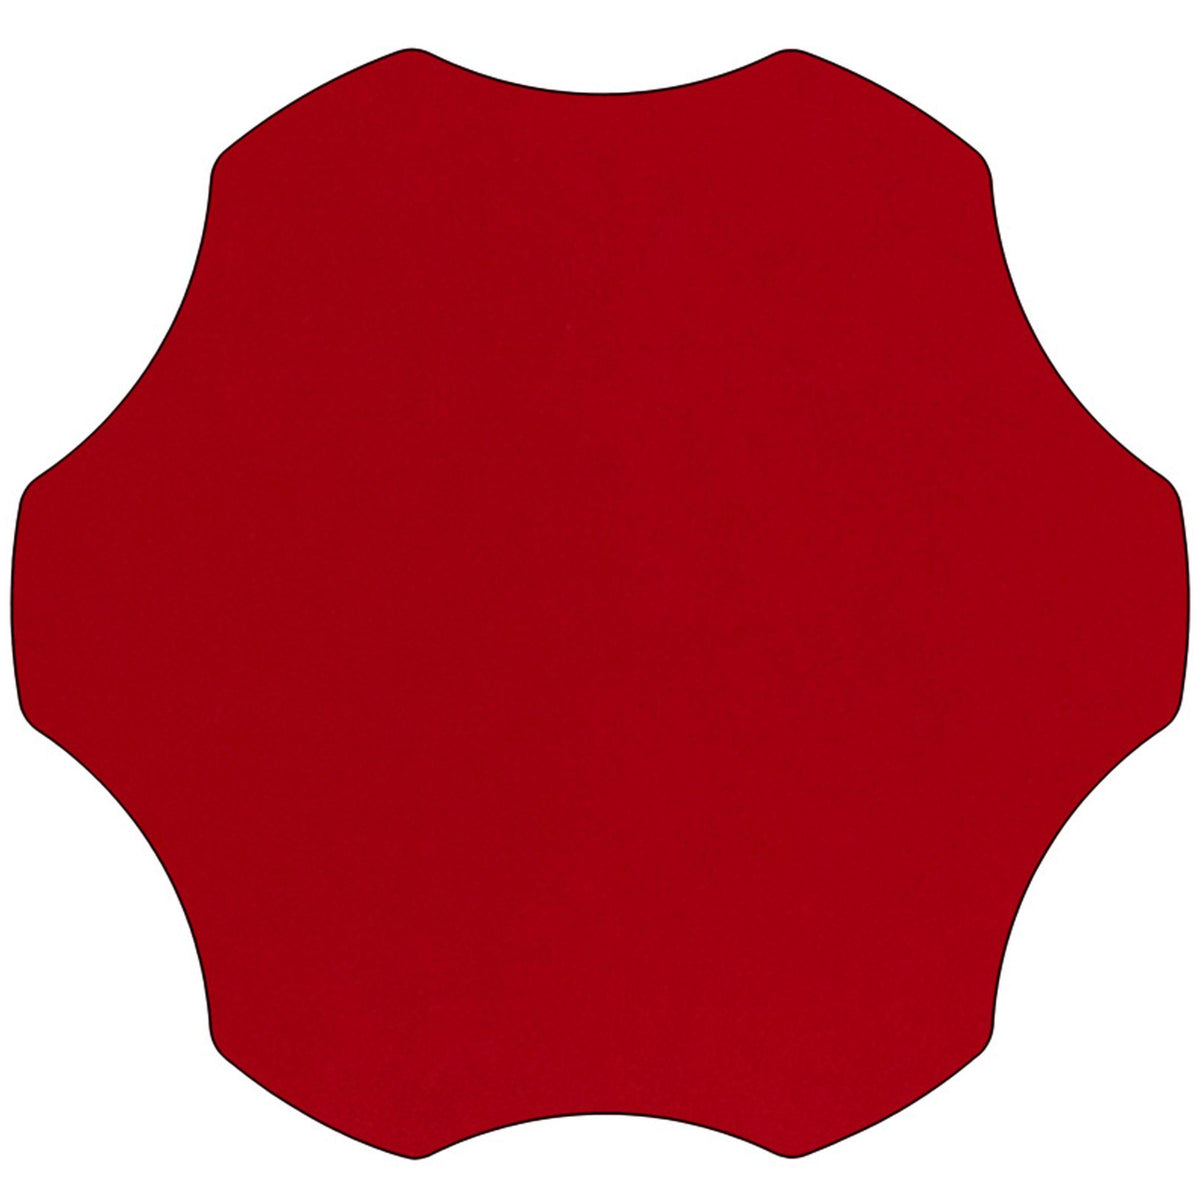 Red |#| 60inch Flower Red Thermal Laminate Activity Table - Standard Height Adjustable Legs